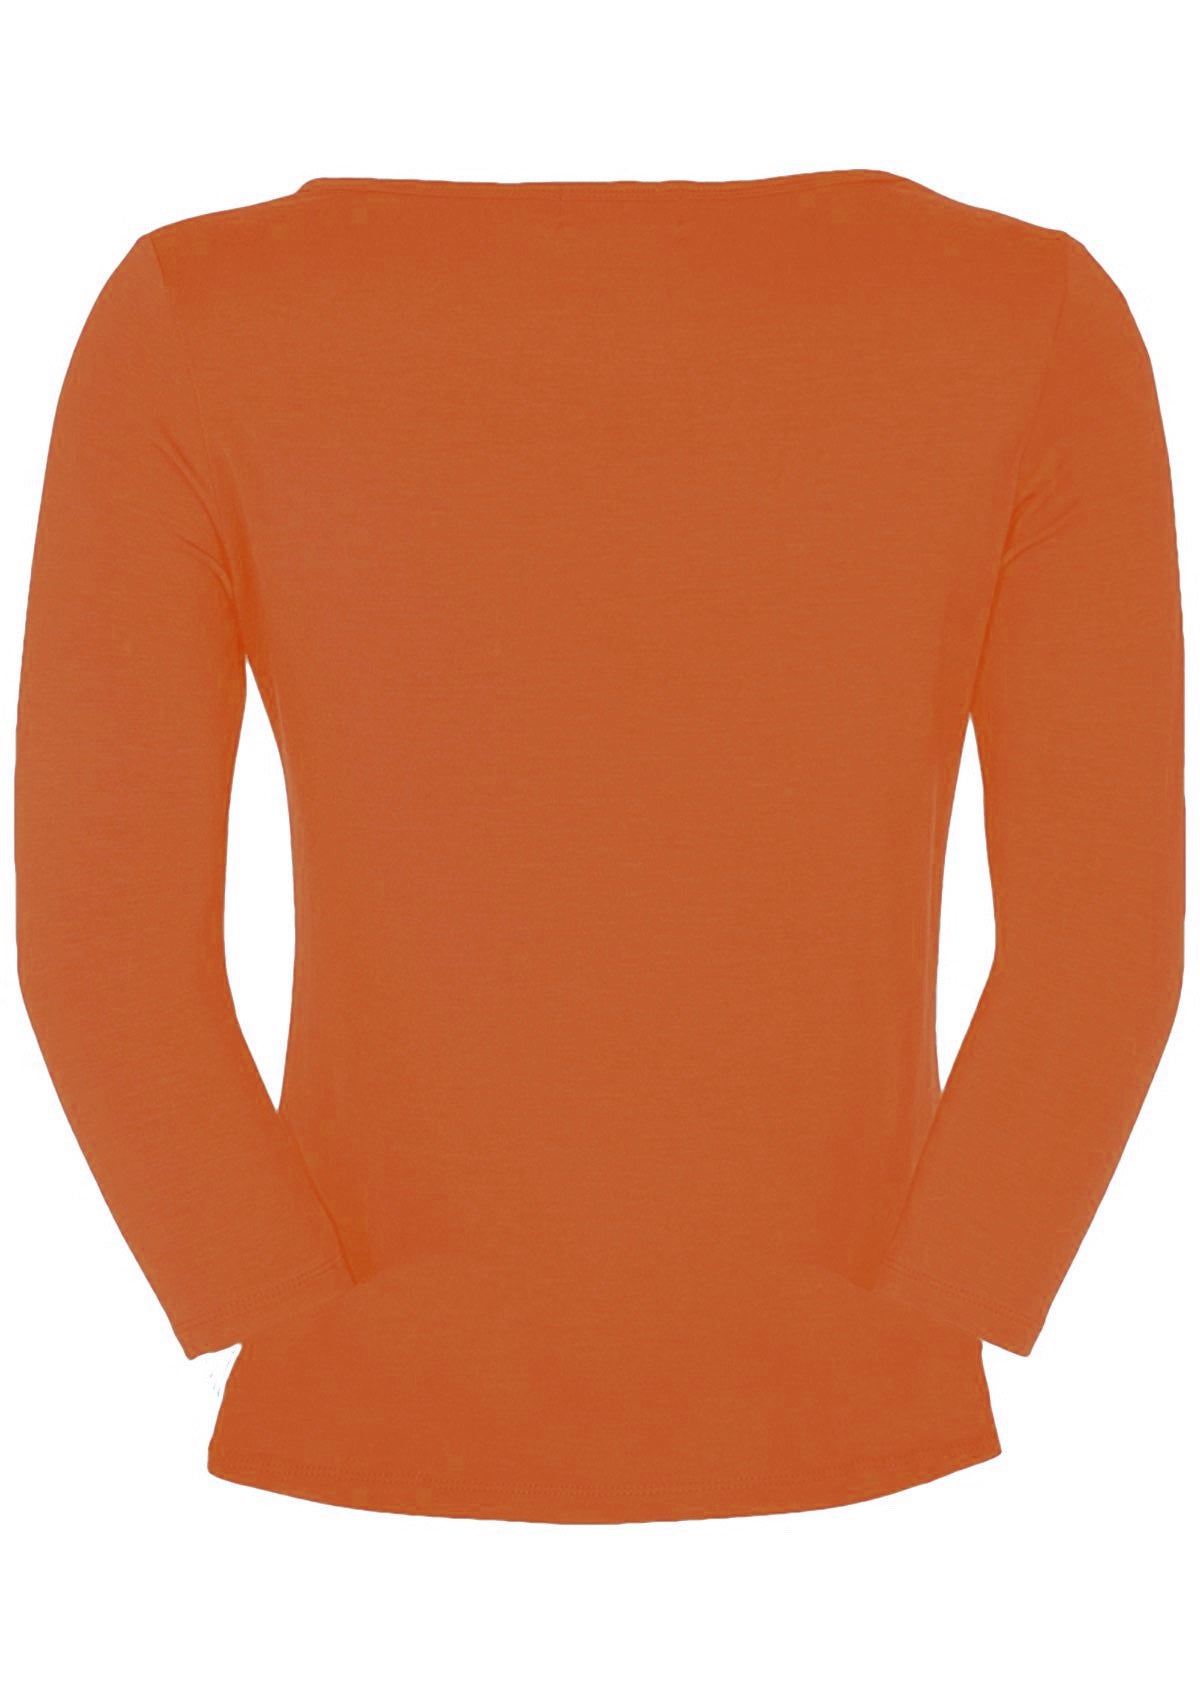 Back view of women's rayon boat neck orange 3/4 sleeve top.